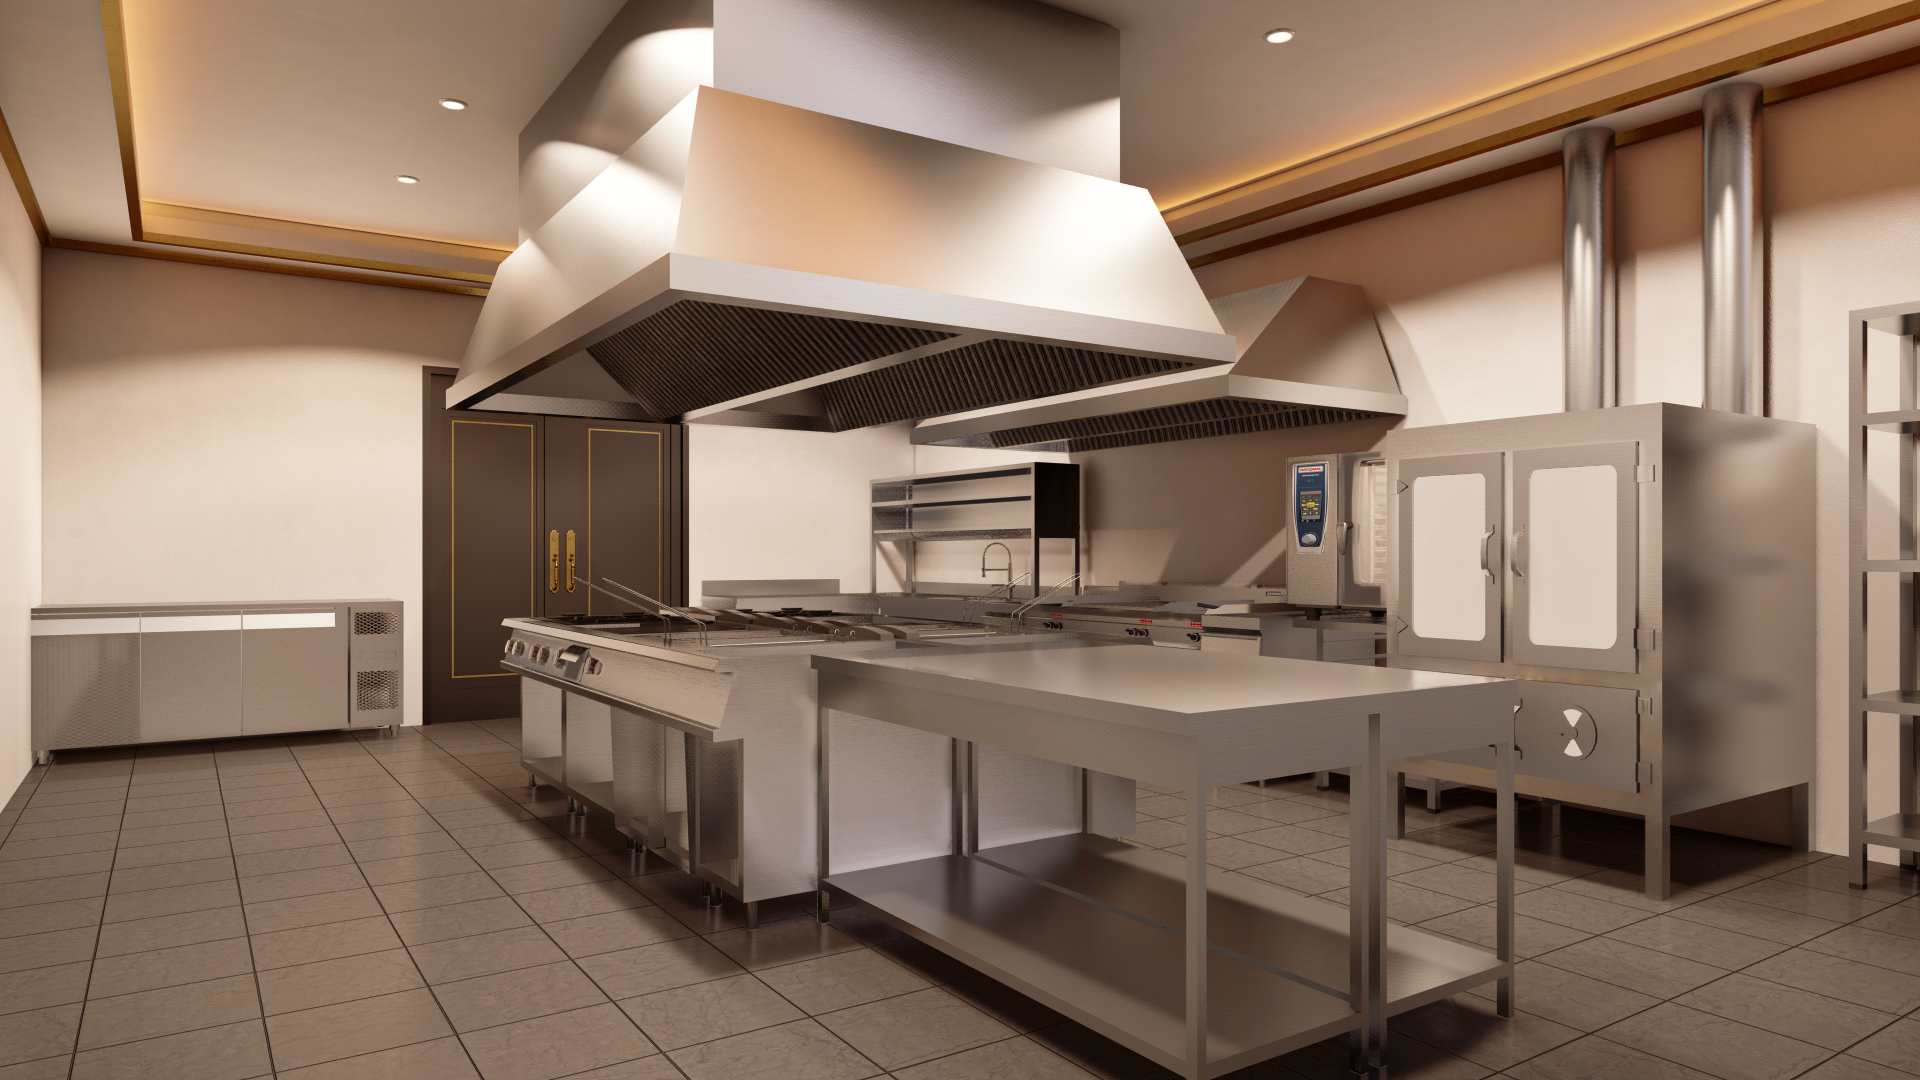 COMMERCIAL KITCHEN (4 of 4)